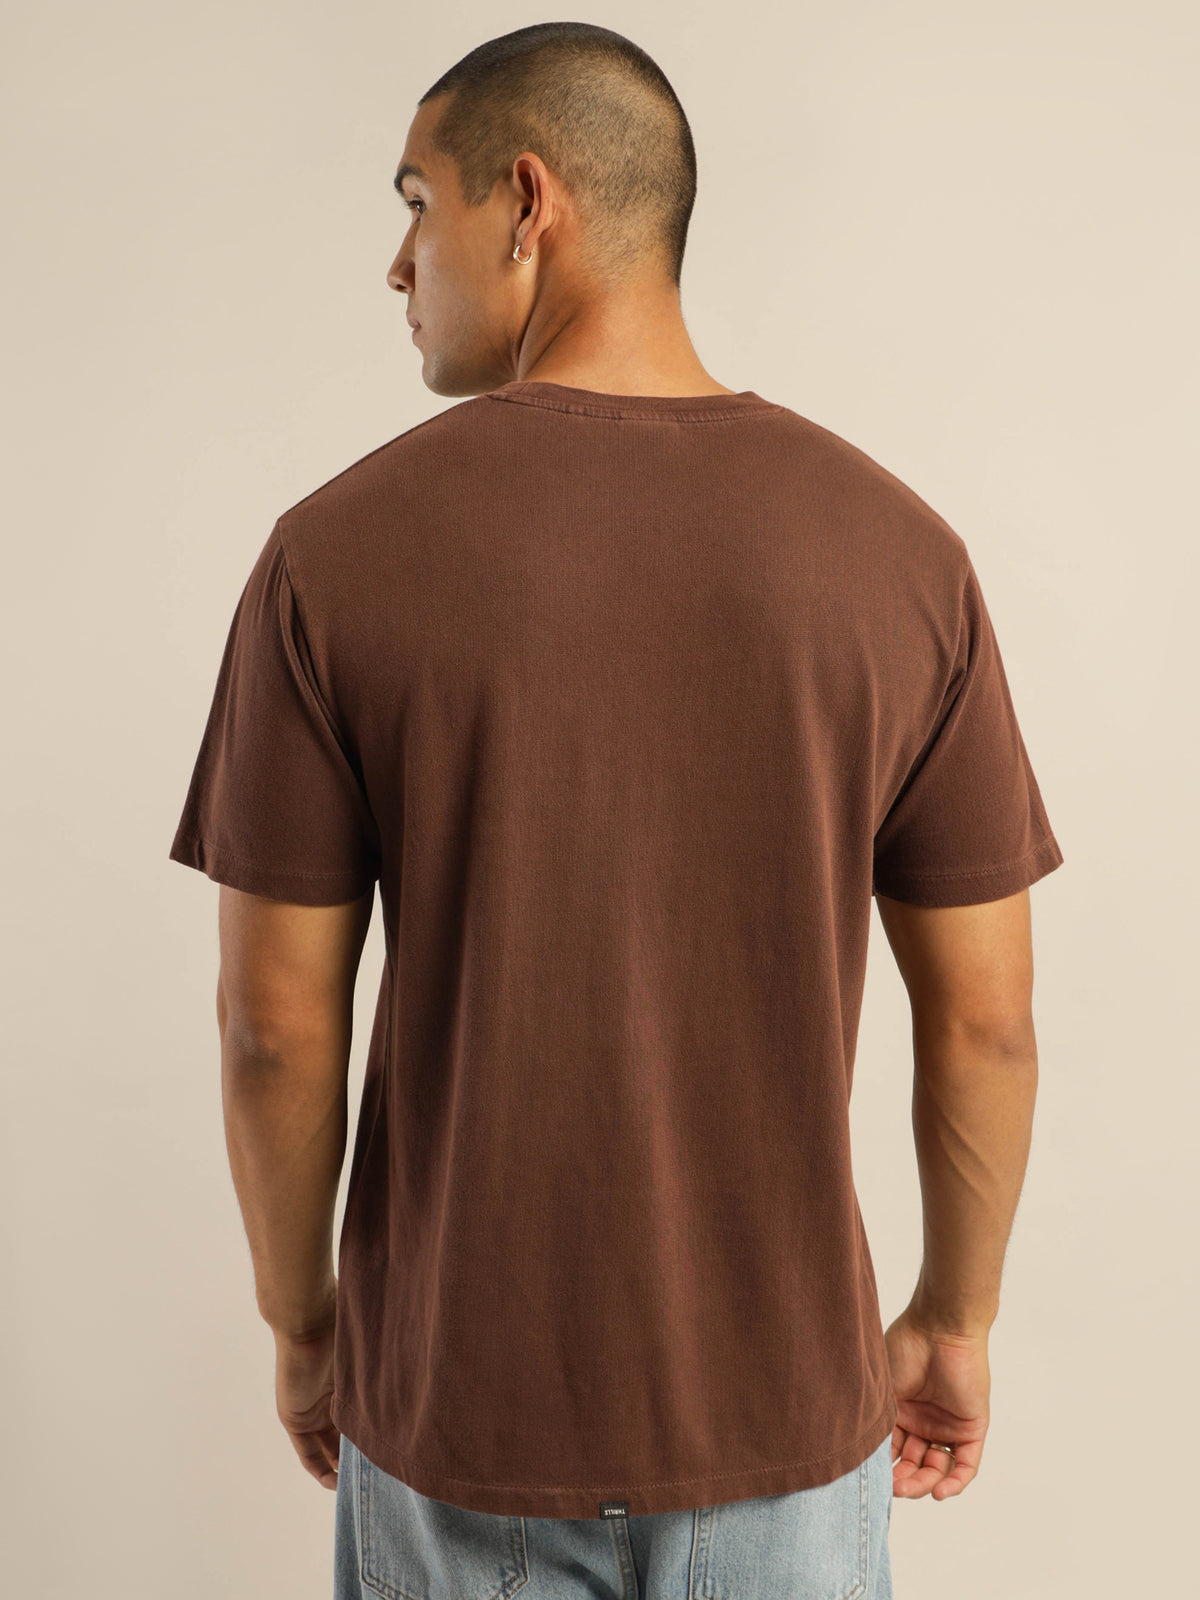 Liste Embro Merch Fit T-Shirt in Washed Cocoa